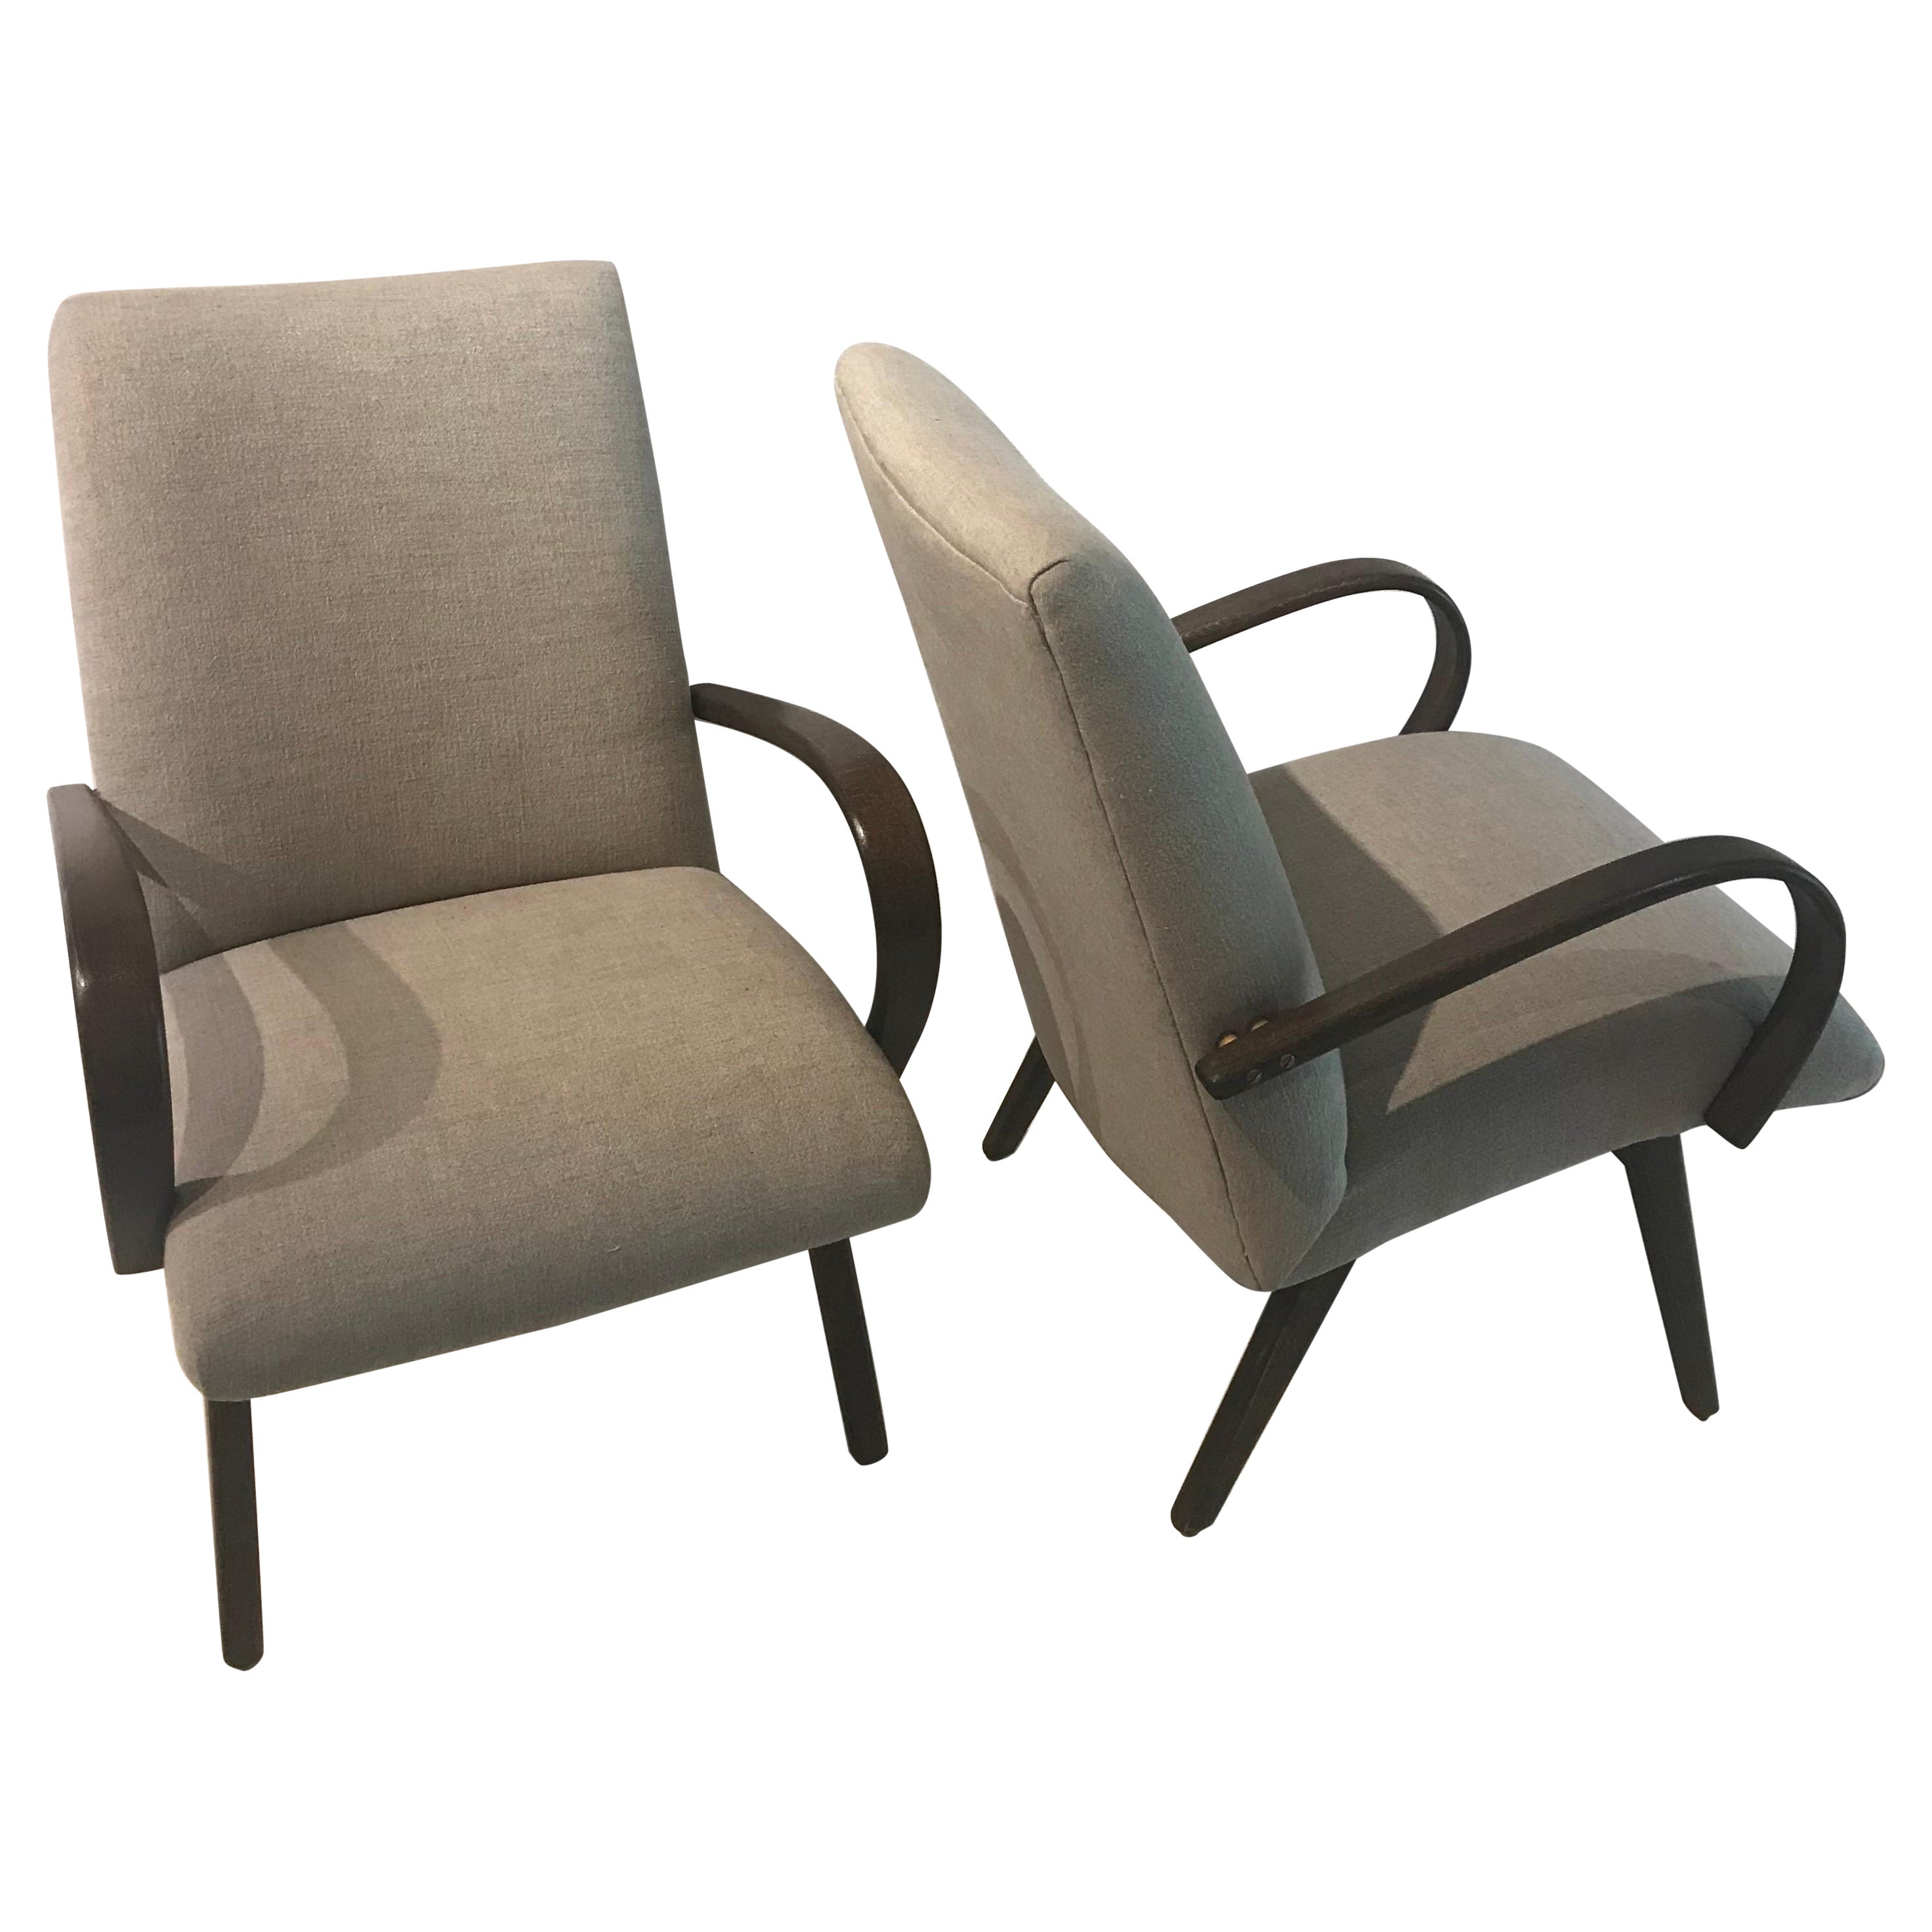 Pair of Early 20th Century Danish Lounge Chairs Reimagined in Belgian Linen For Sale